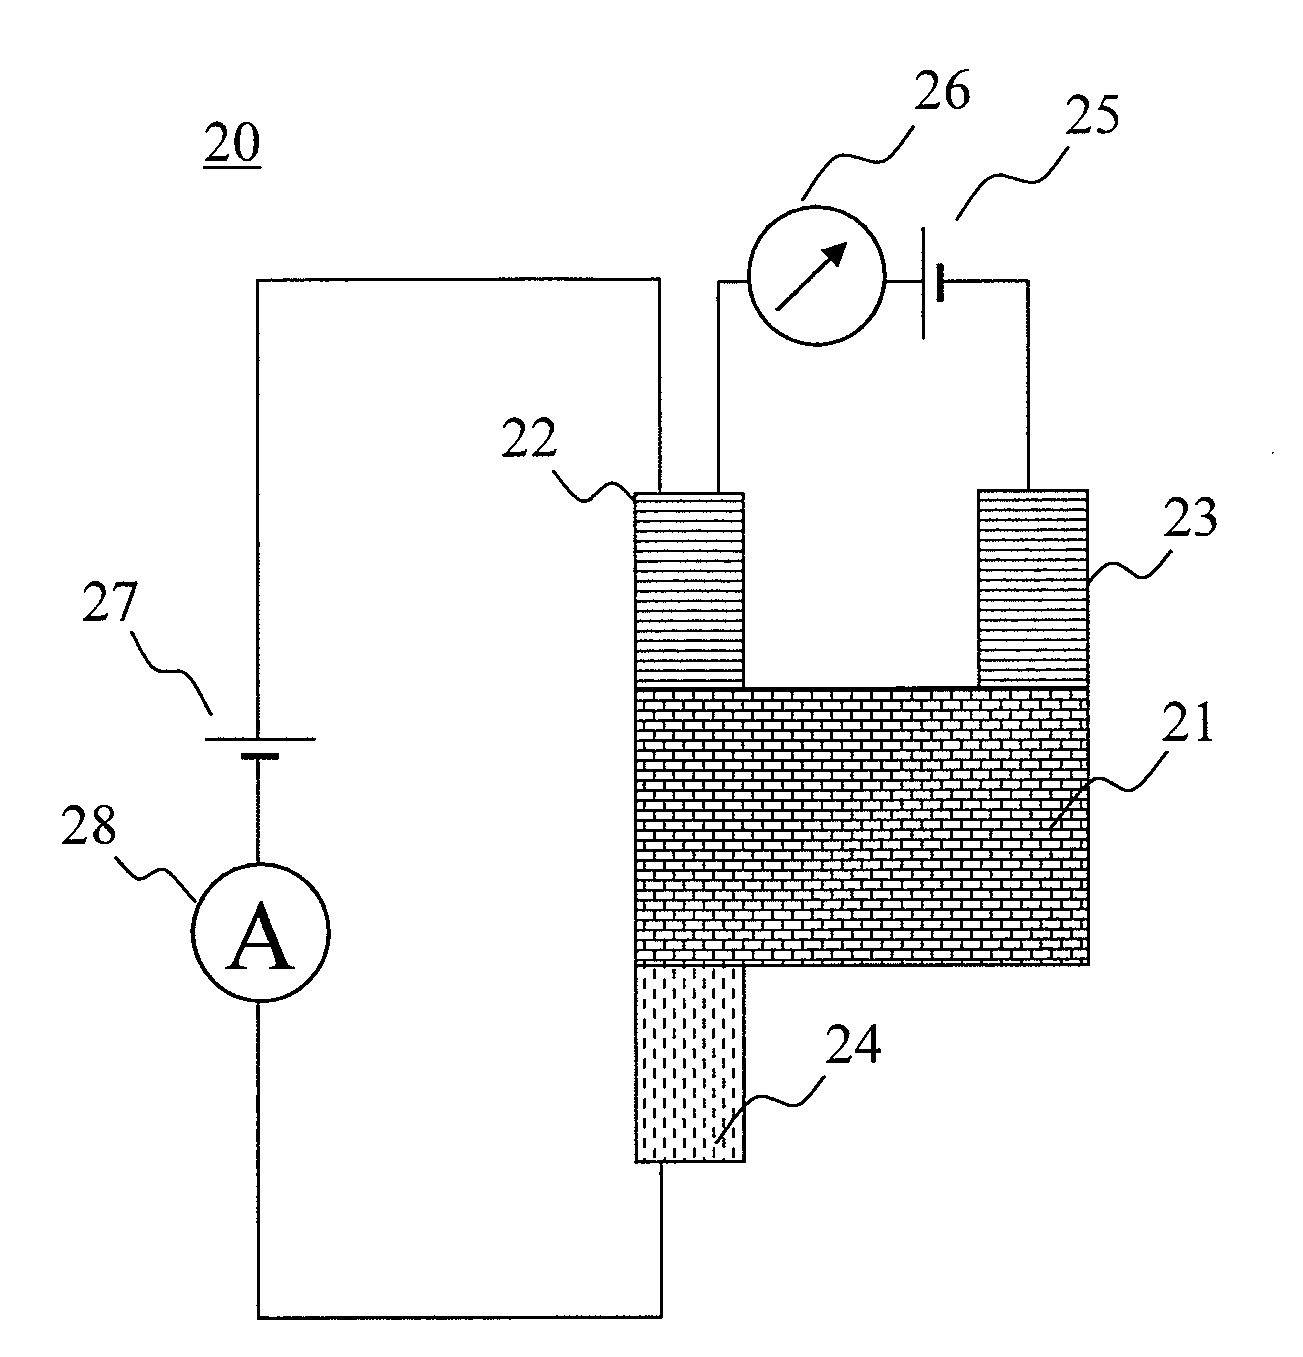 Magnetic memory cell and magnetic memory device